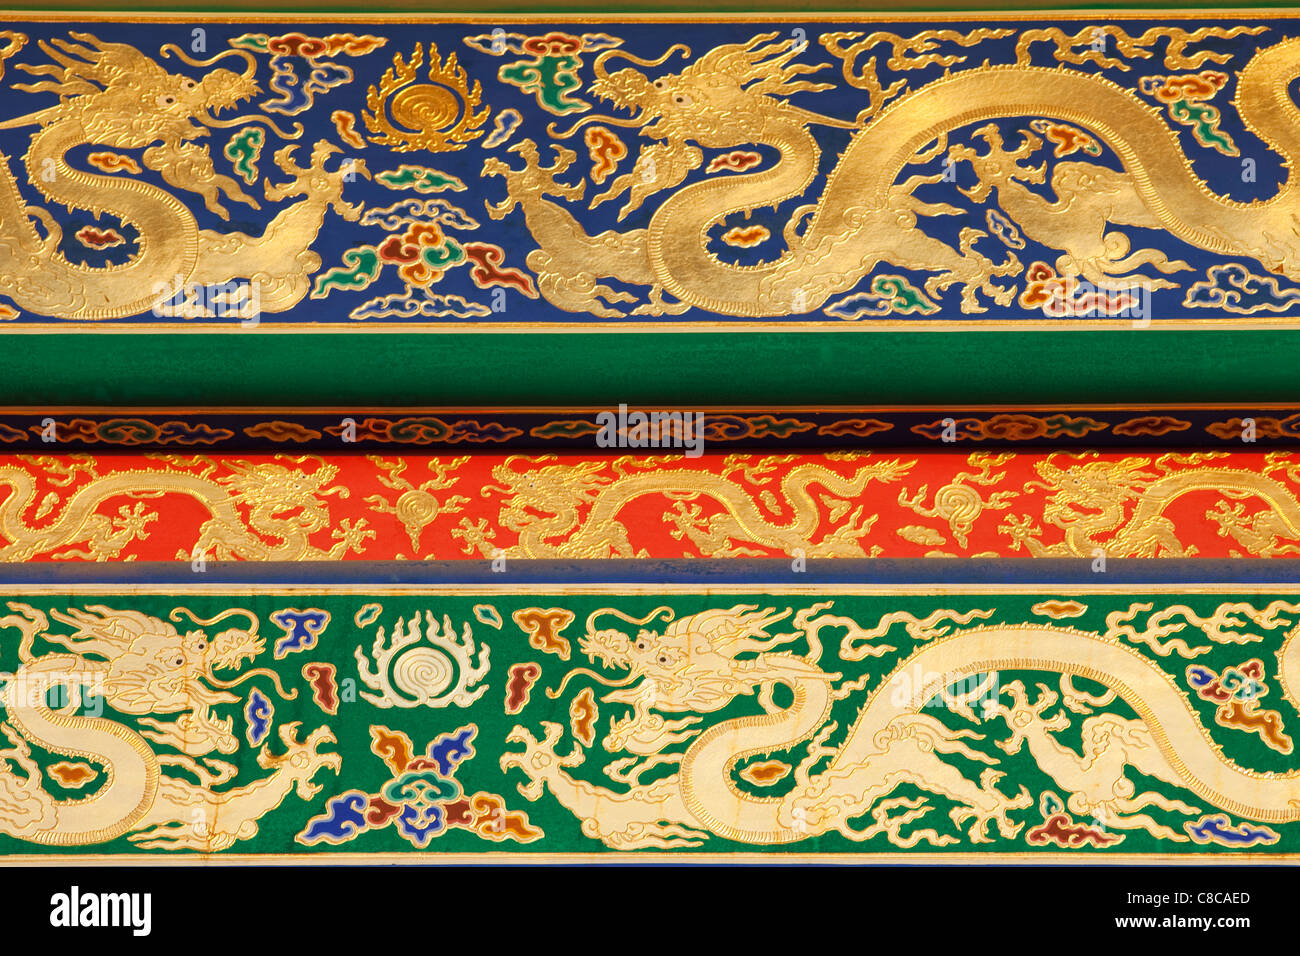 China, Beijing, Palace Museum or Forbidden City, Ceiling Detail depicting Dragons Stock Photo